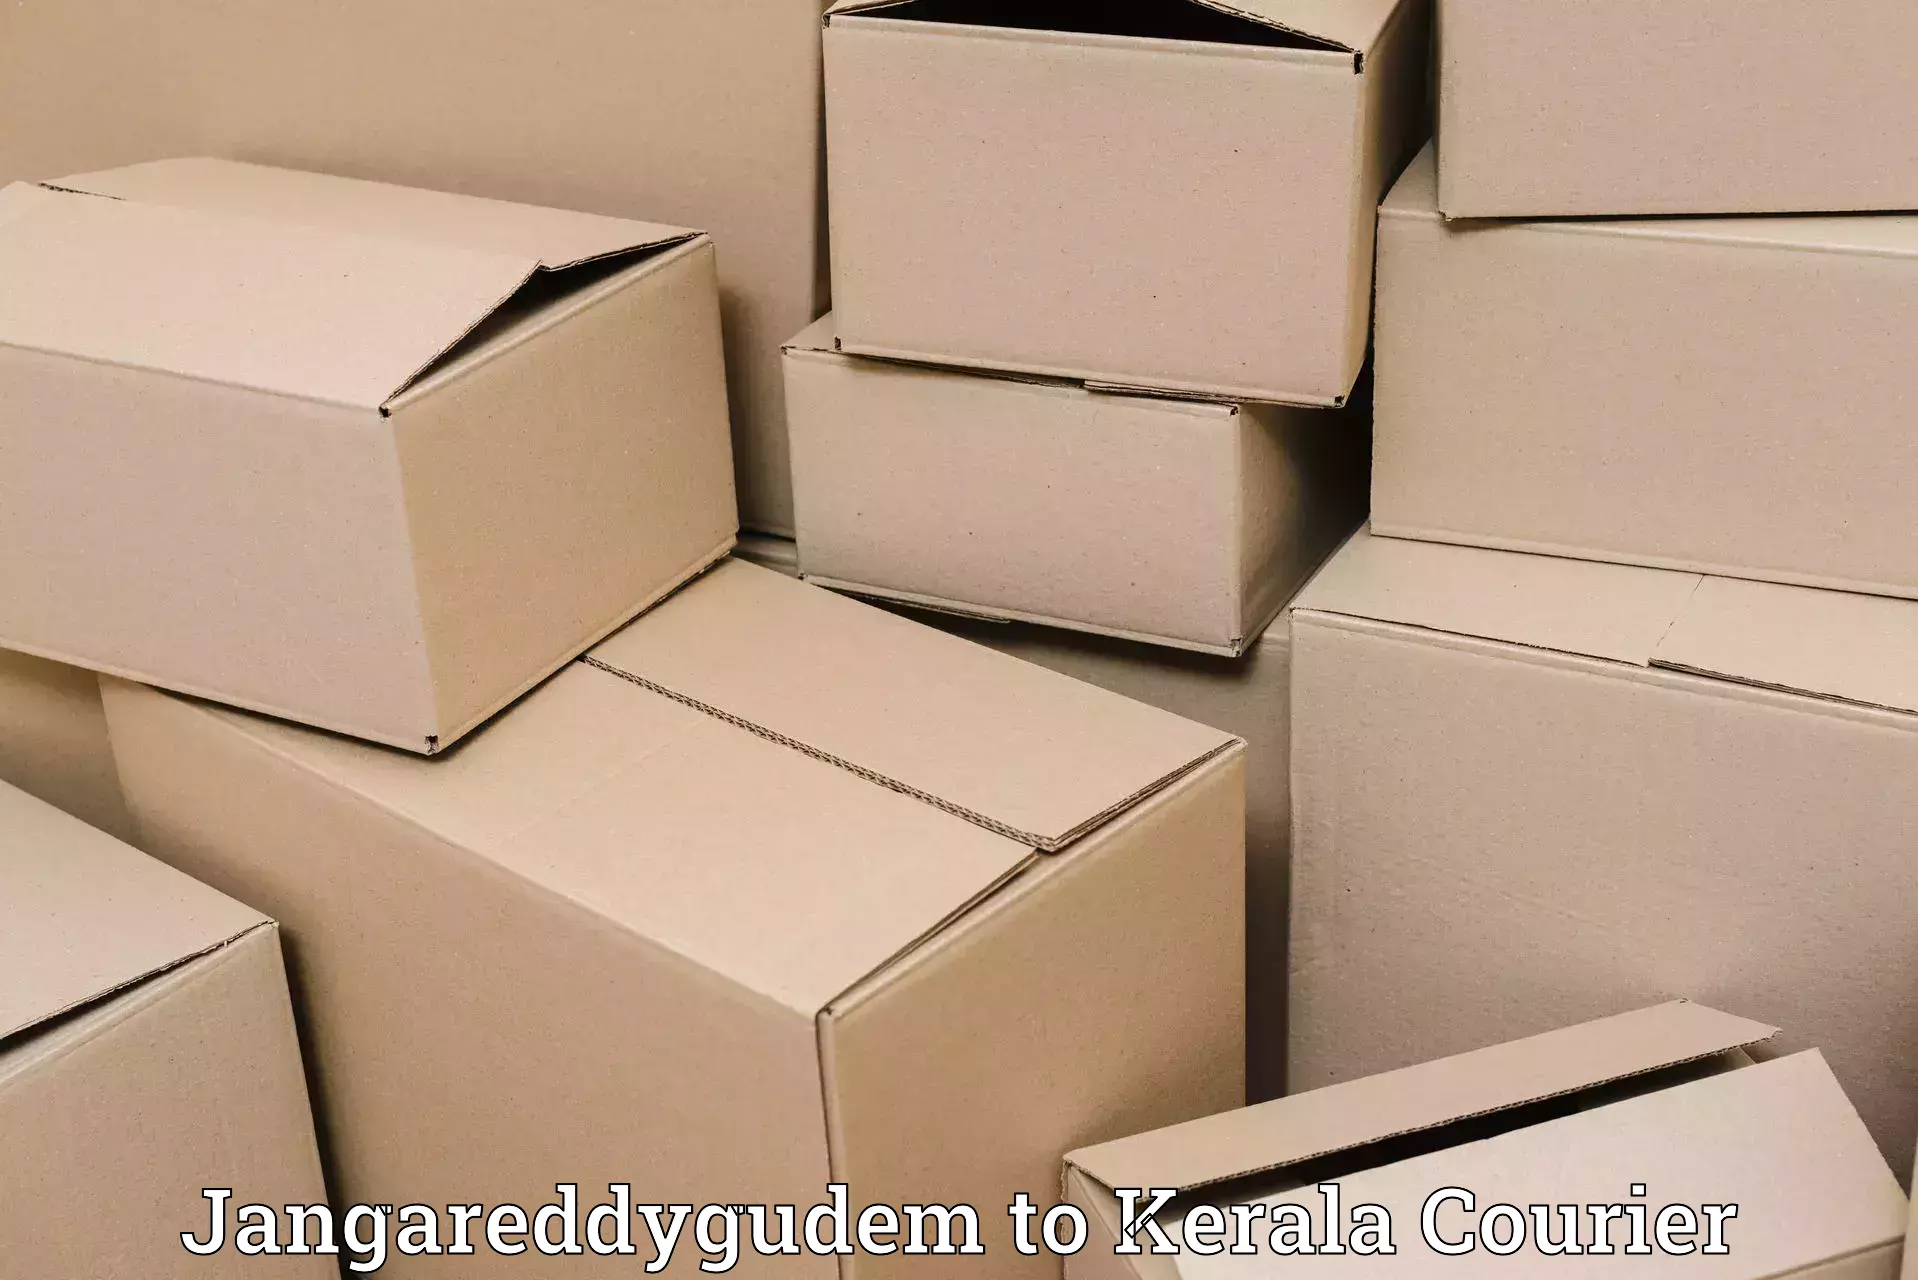 Heavy parcel delivery Jangareddygudem to Cochin University of Science and Technology